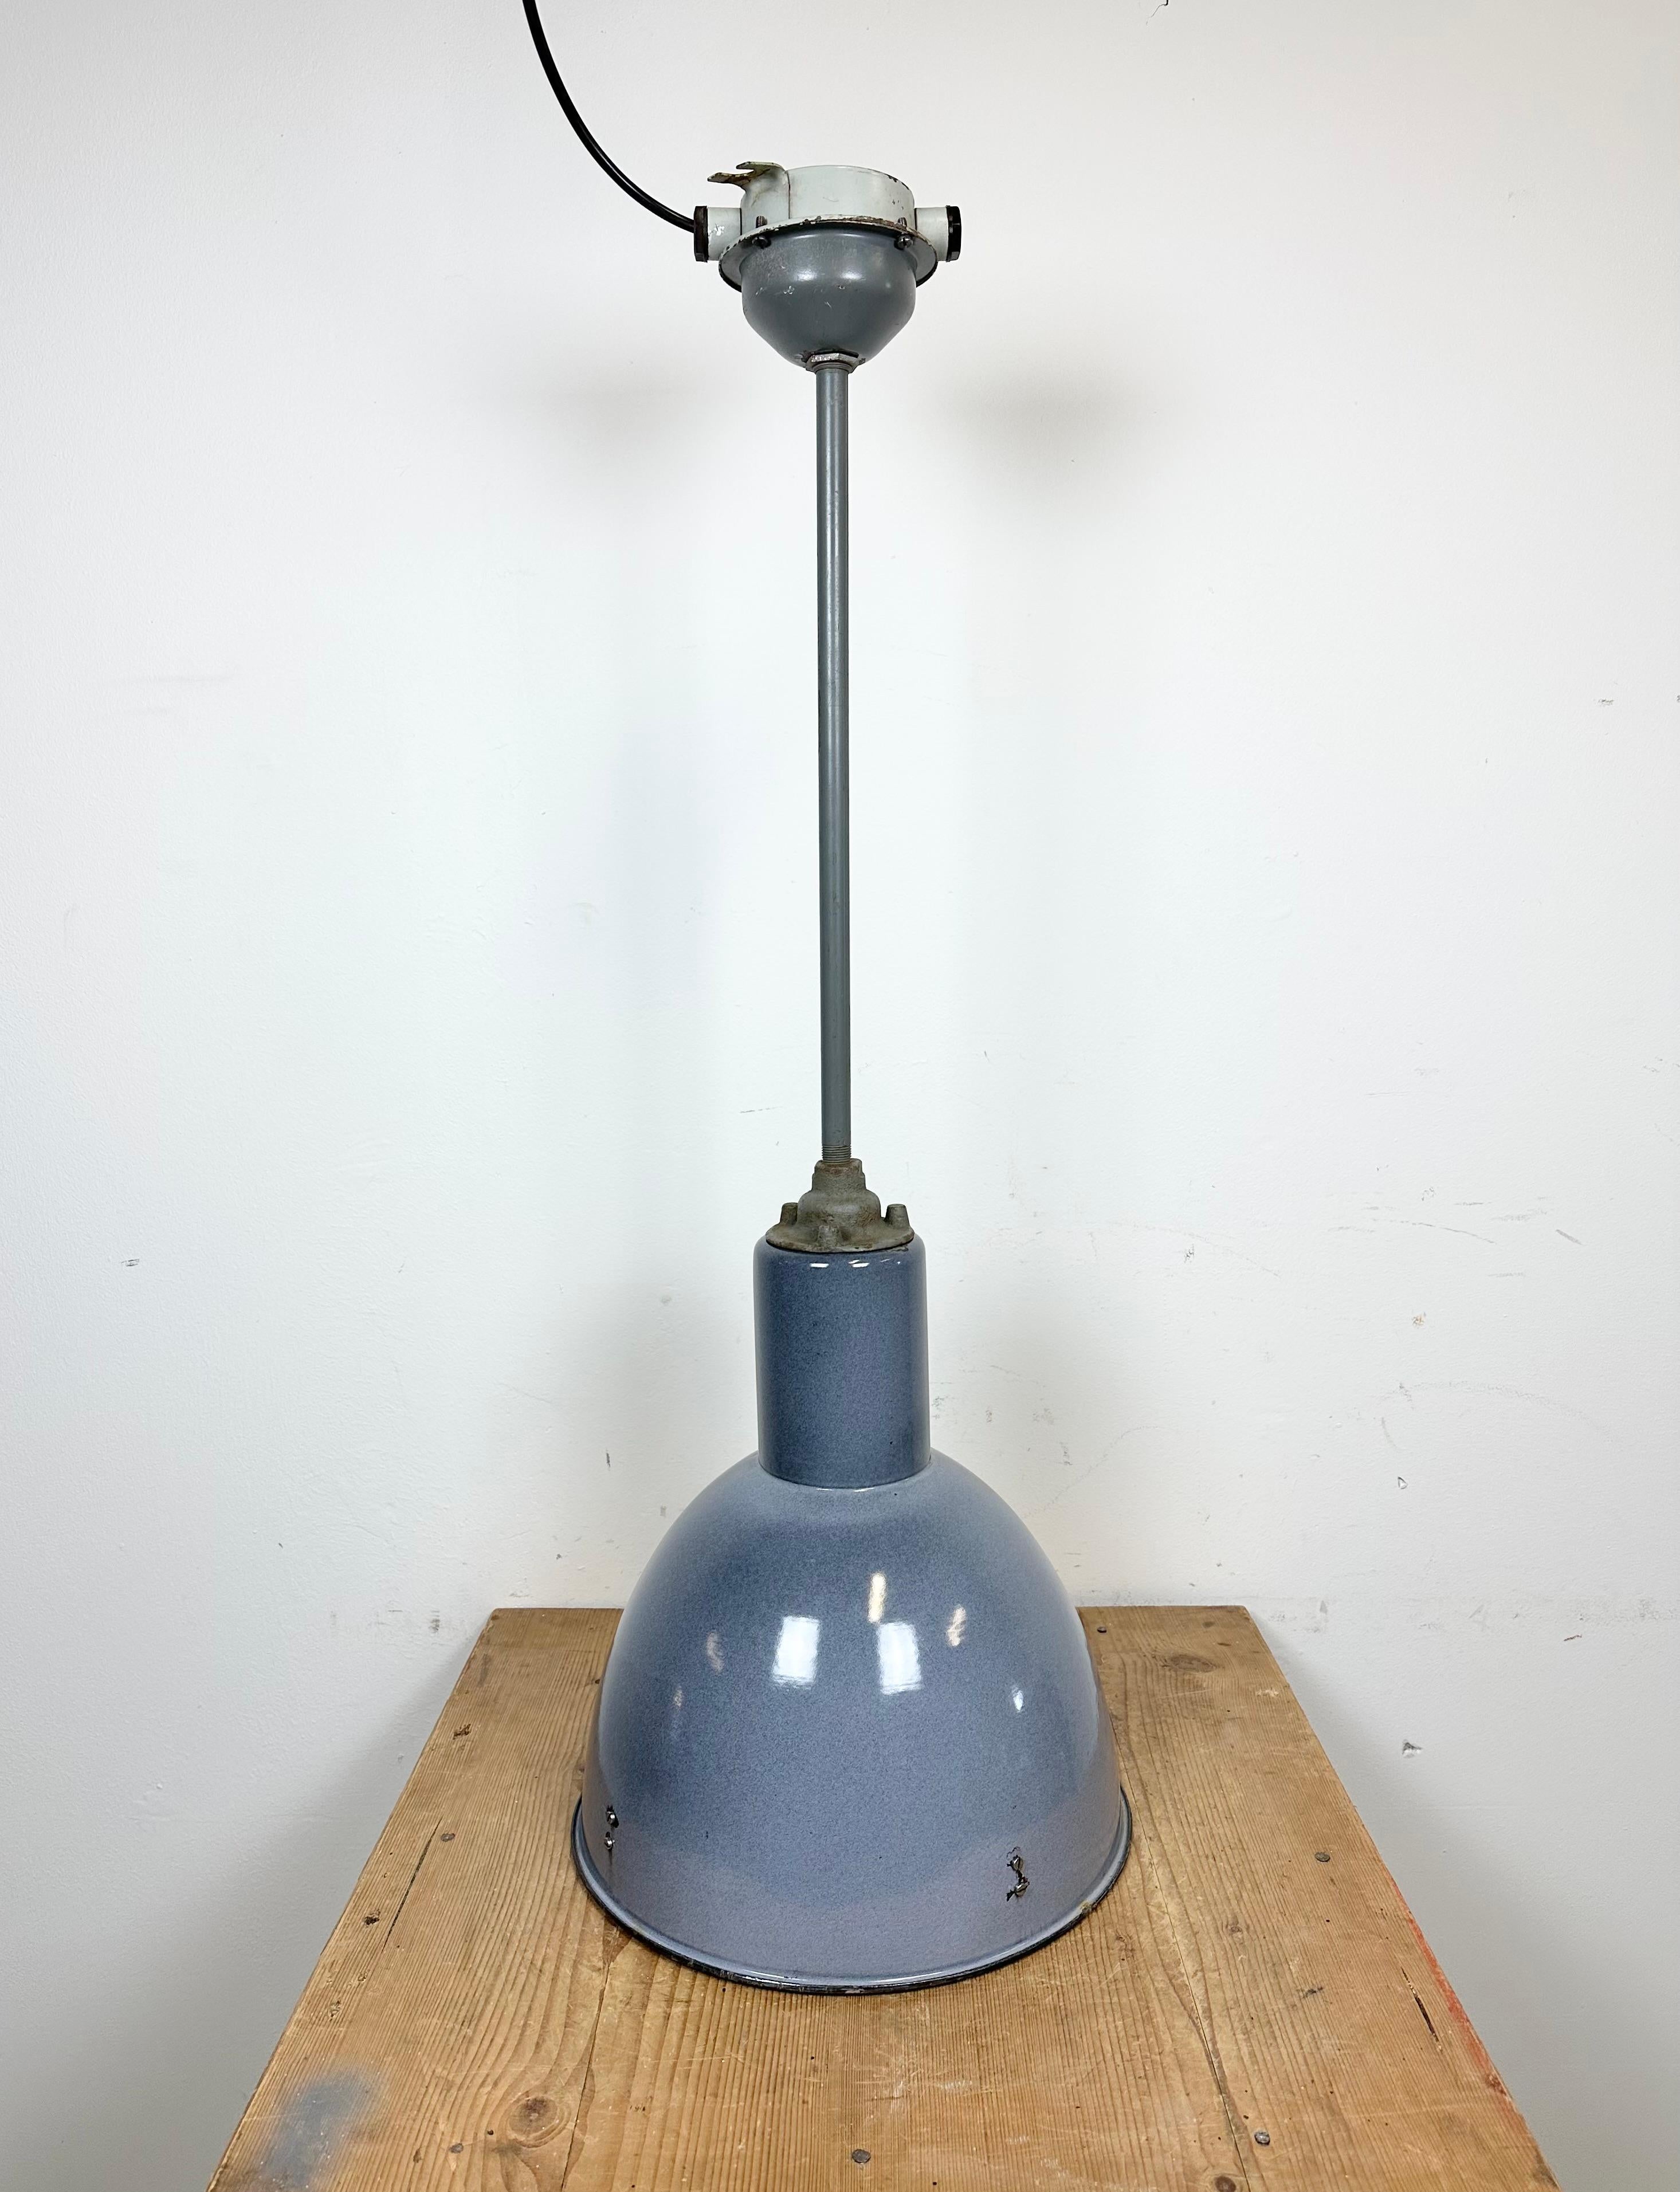 Vintage industrial enamel ceiling lamp made by Elektrosvit in former Czechoslovakia during the 1950s. It features a grey ( blue ) enamel shade with white enamel interior and iron ceiling mounting. New porcelain socket requires E 27/ E 26 light